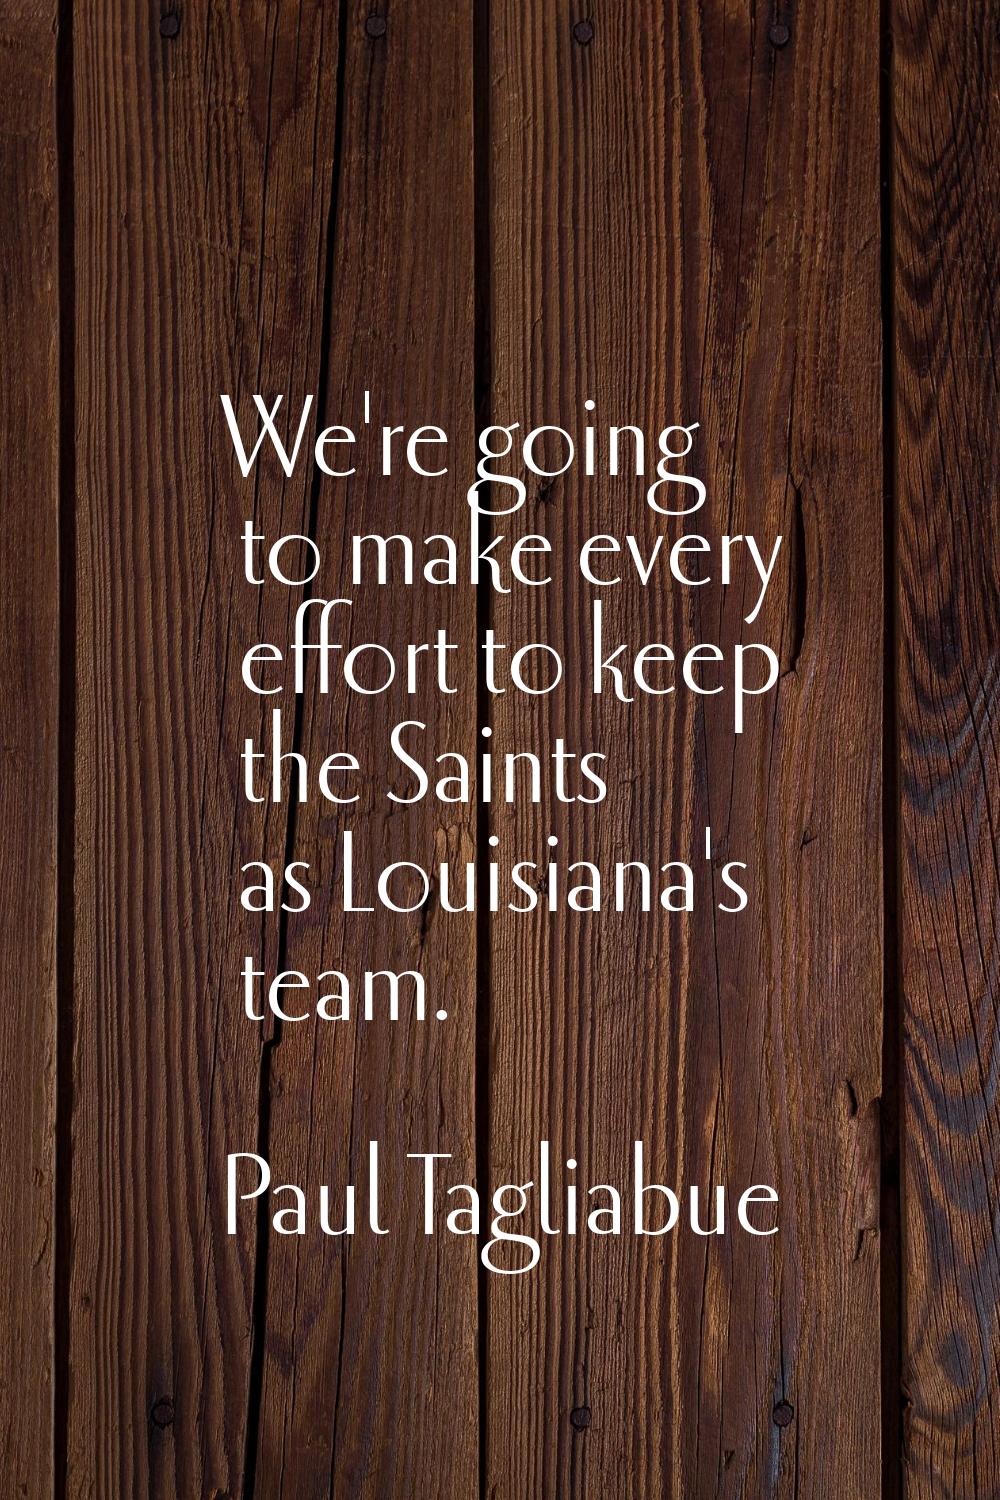 We're going to make every effort to keep the Saints as Louisiana's team.